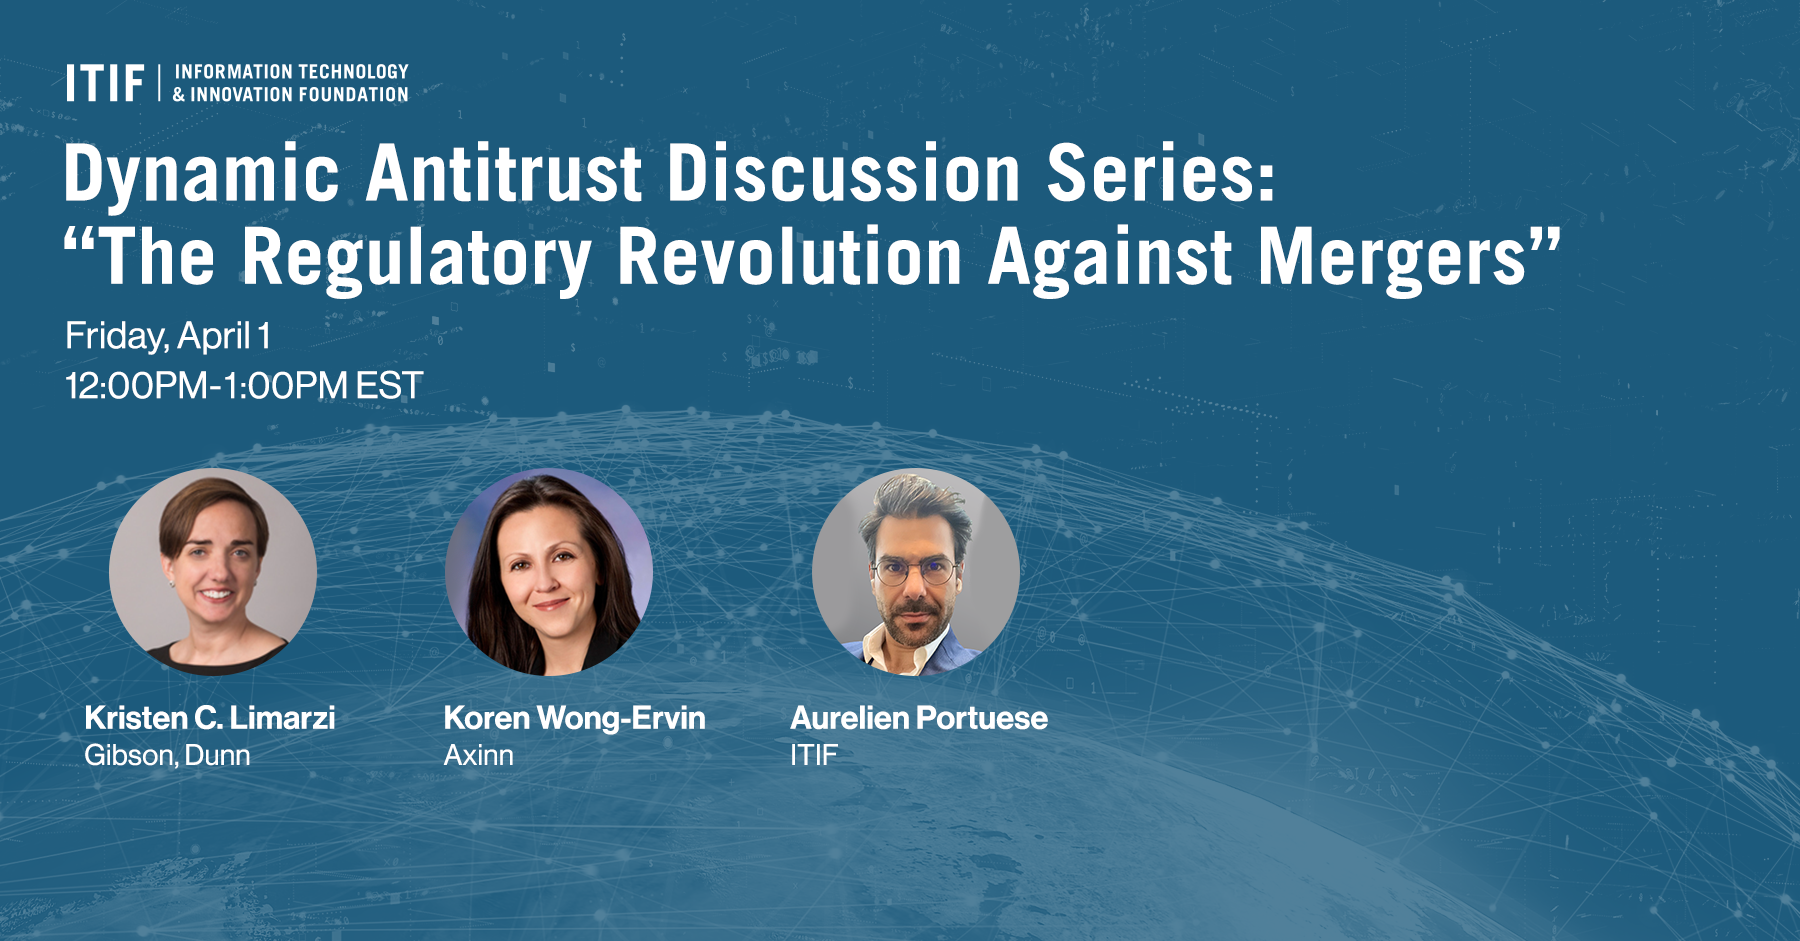 Dynamic Antitrust Discussion Series: “The Regulatory Revolution Against Mergers”